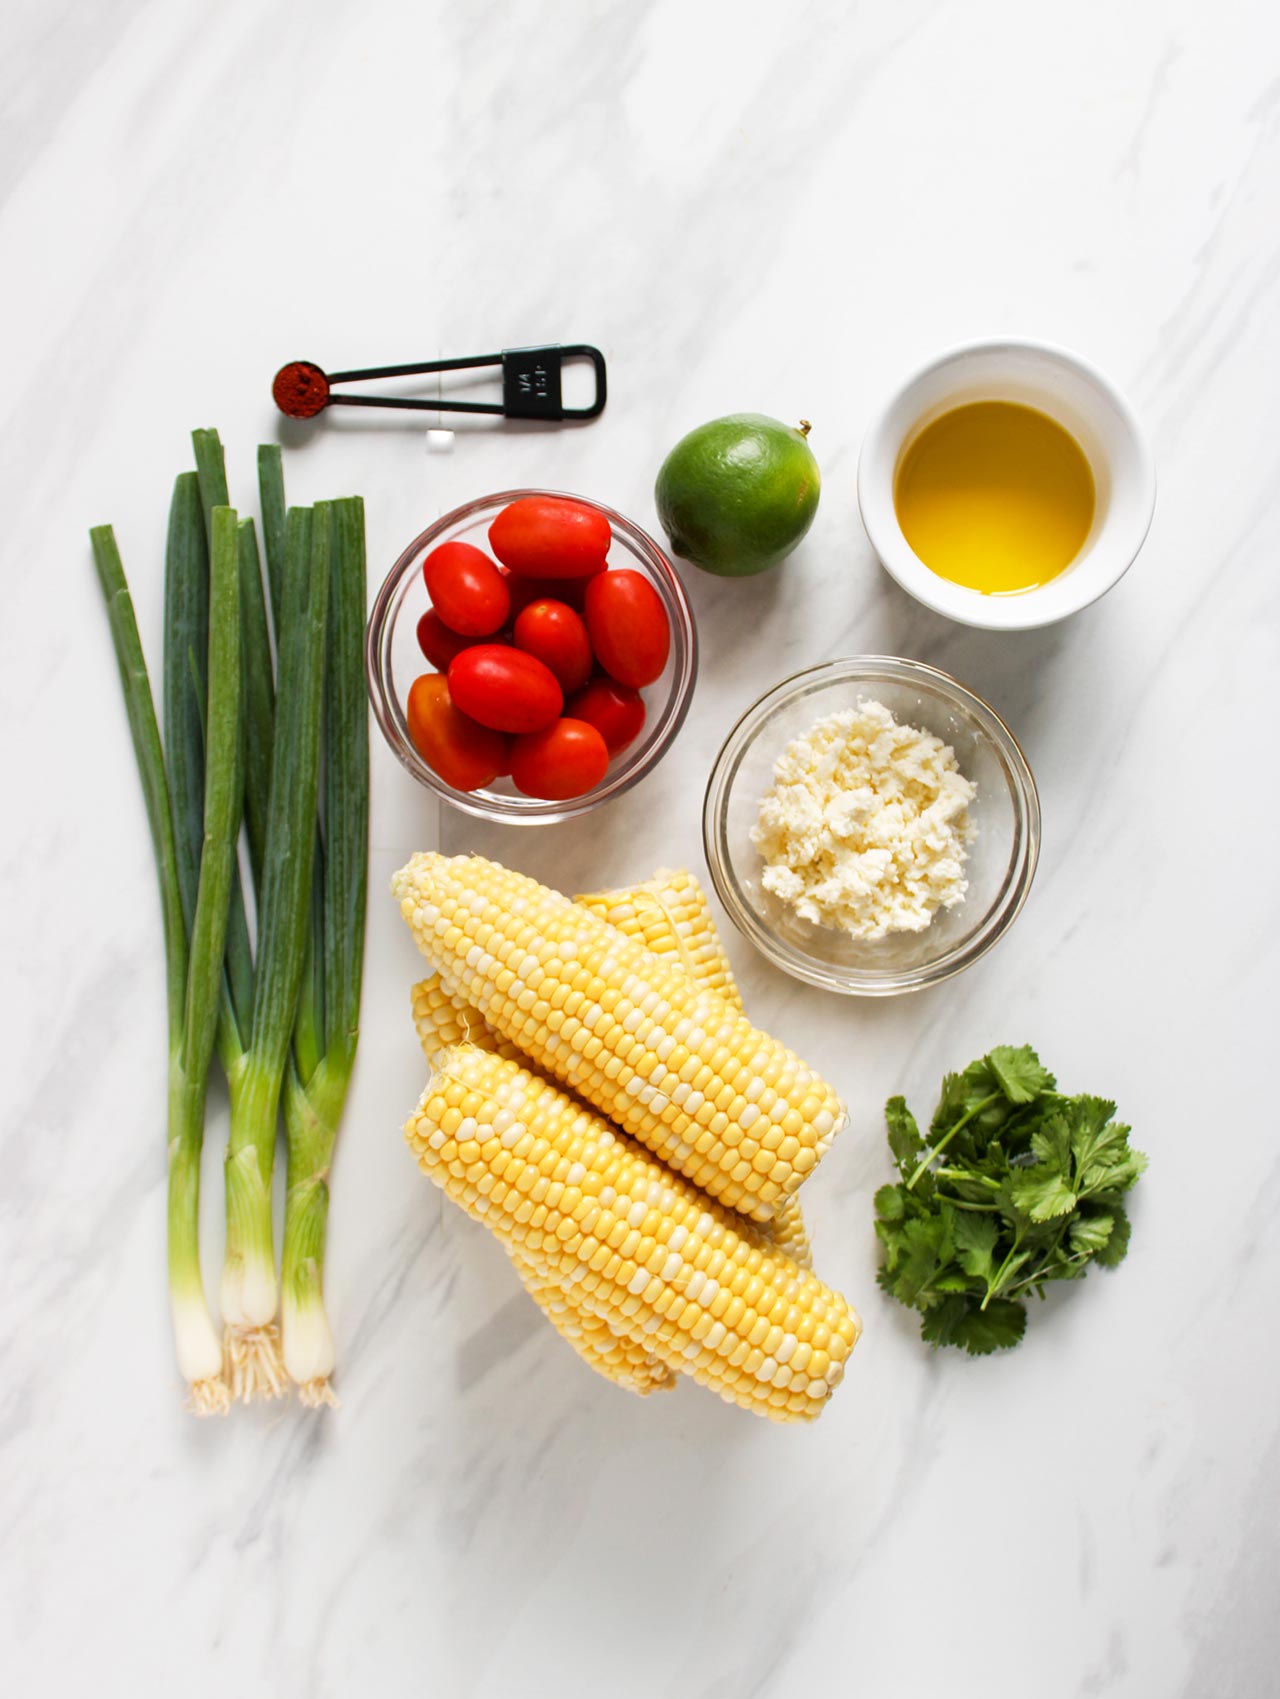 Ingredients for Roasted Corn Salad on a white marble surface.